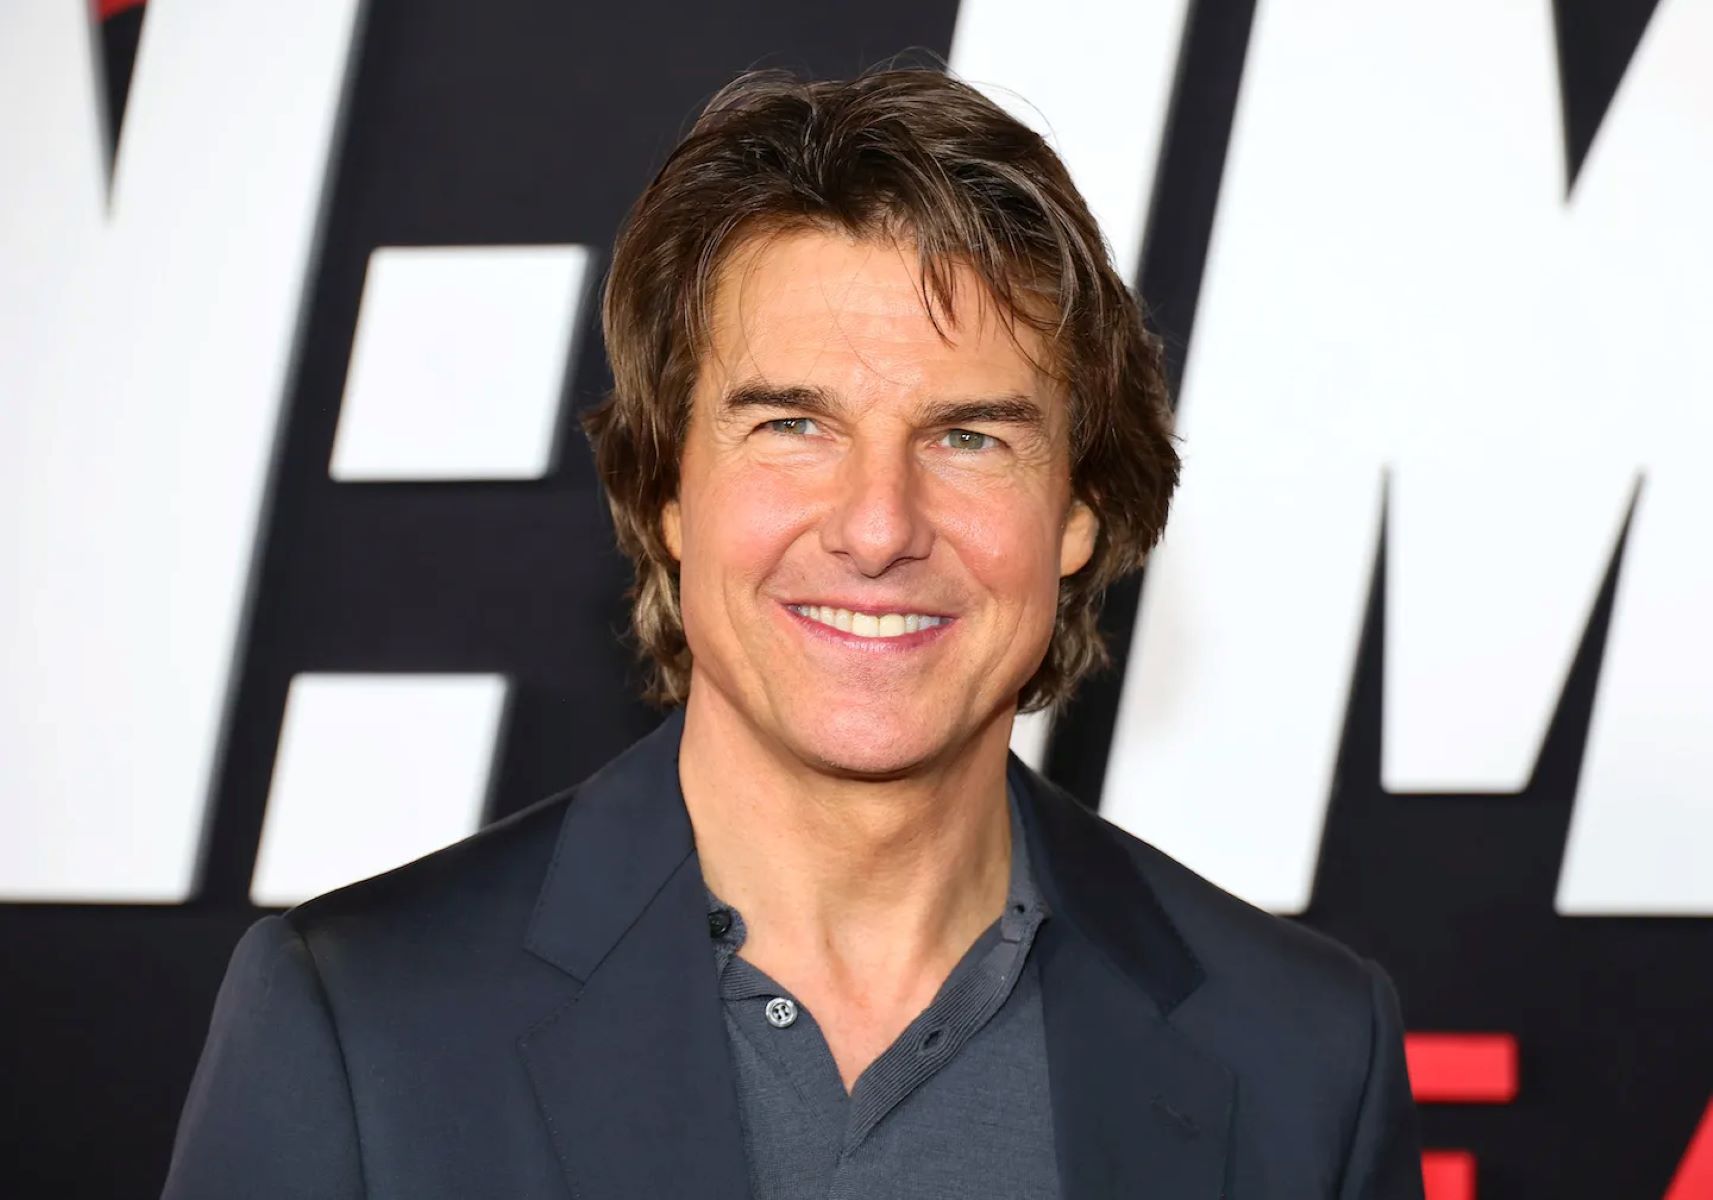 Tom Cruise’s Insanity Exposed: Shocking Actions And Scientology Involvement